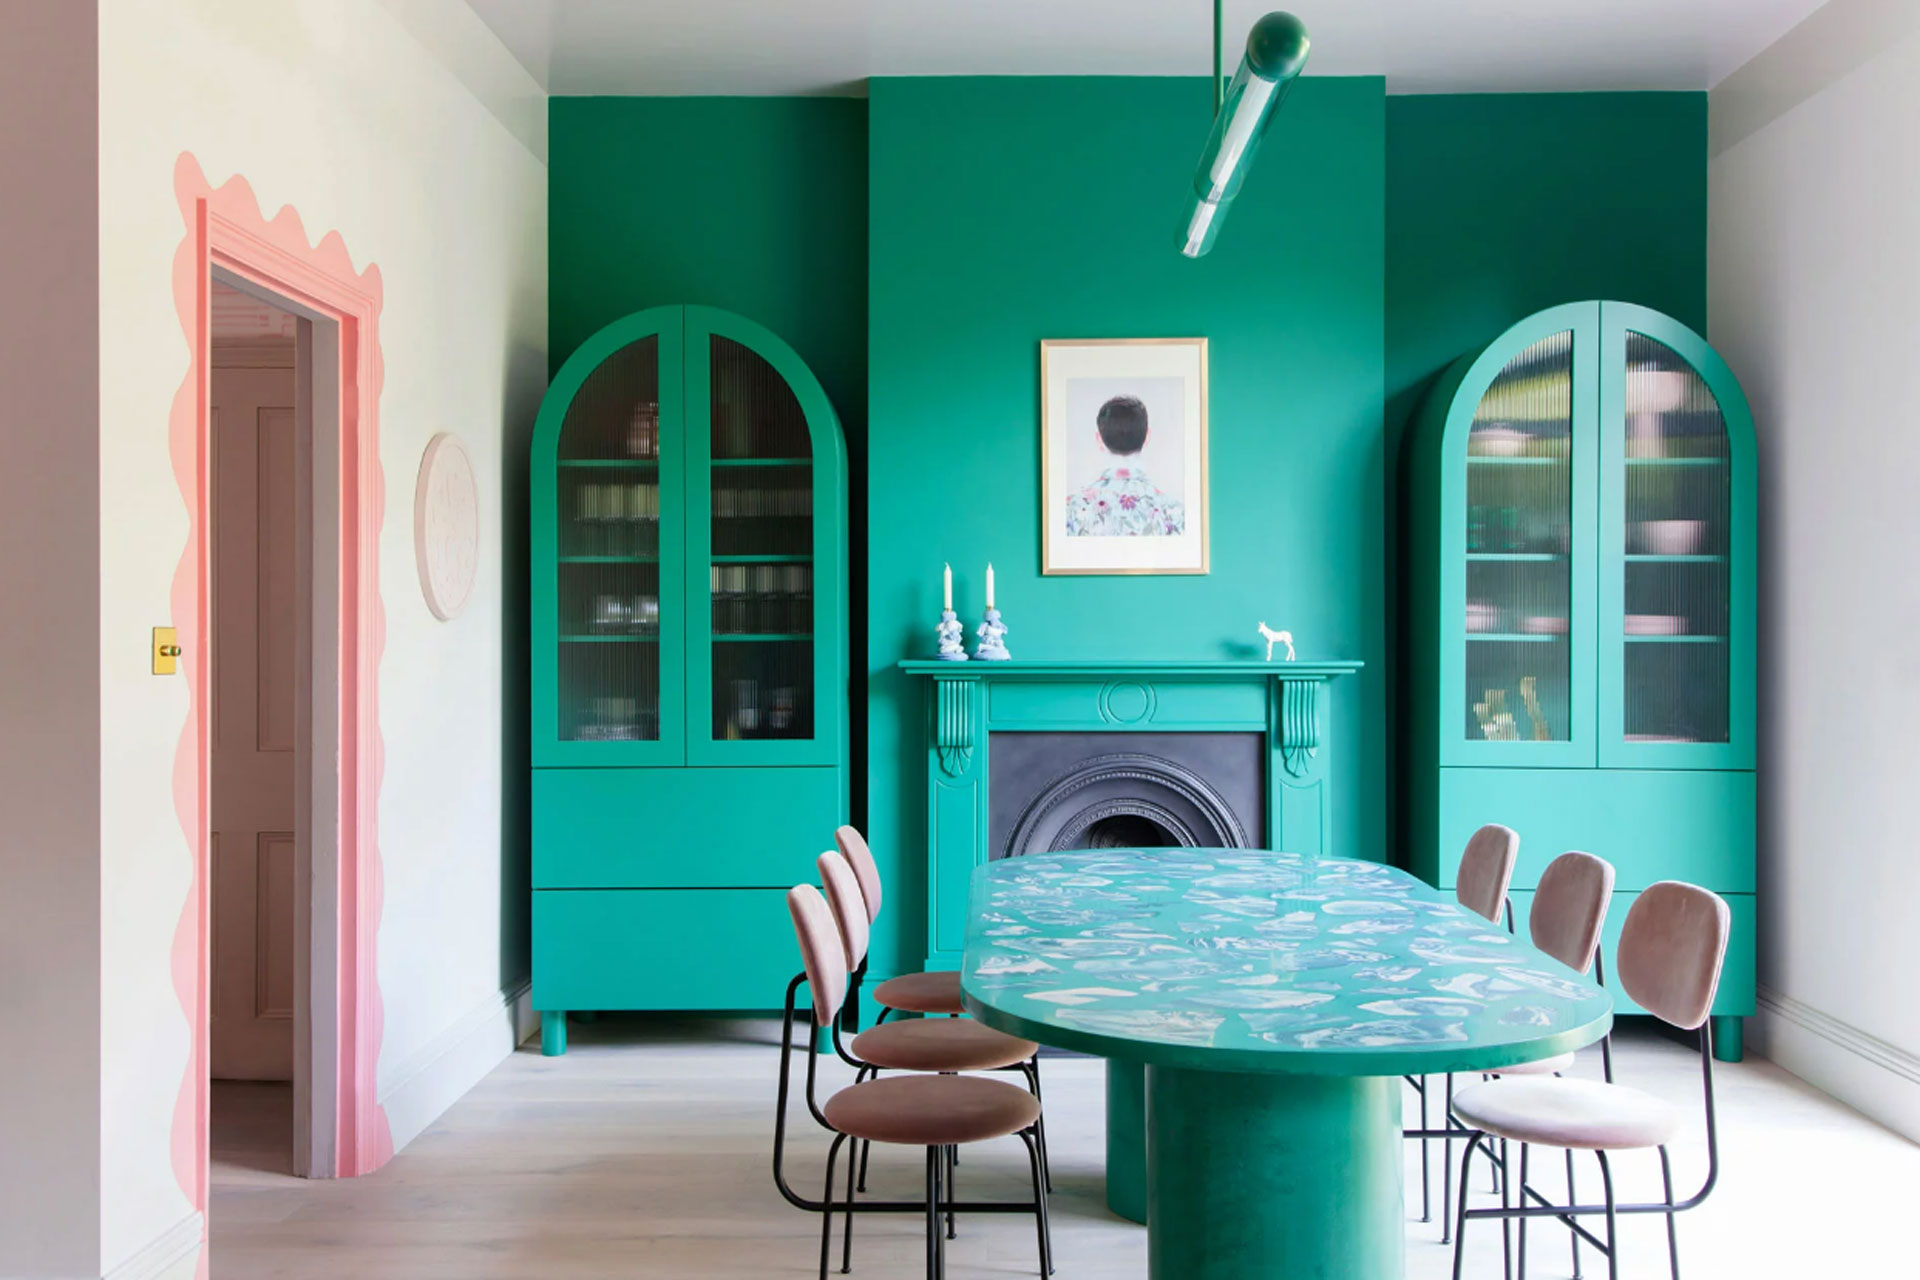 Pink and Green Interiors by 2LG Studio